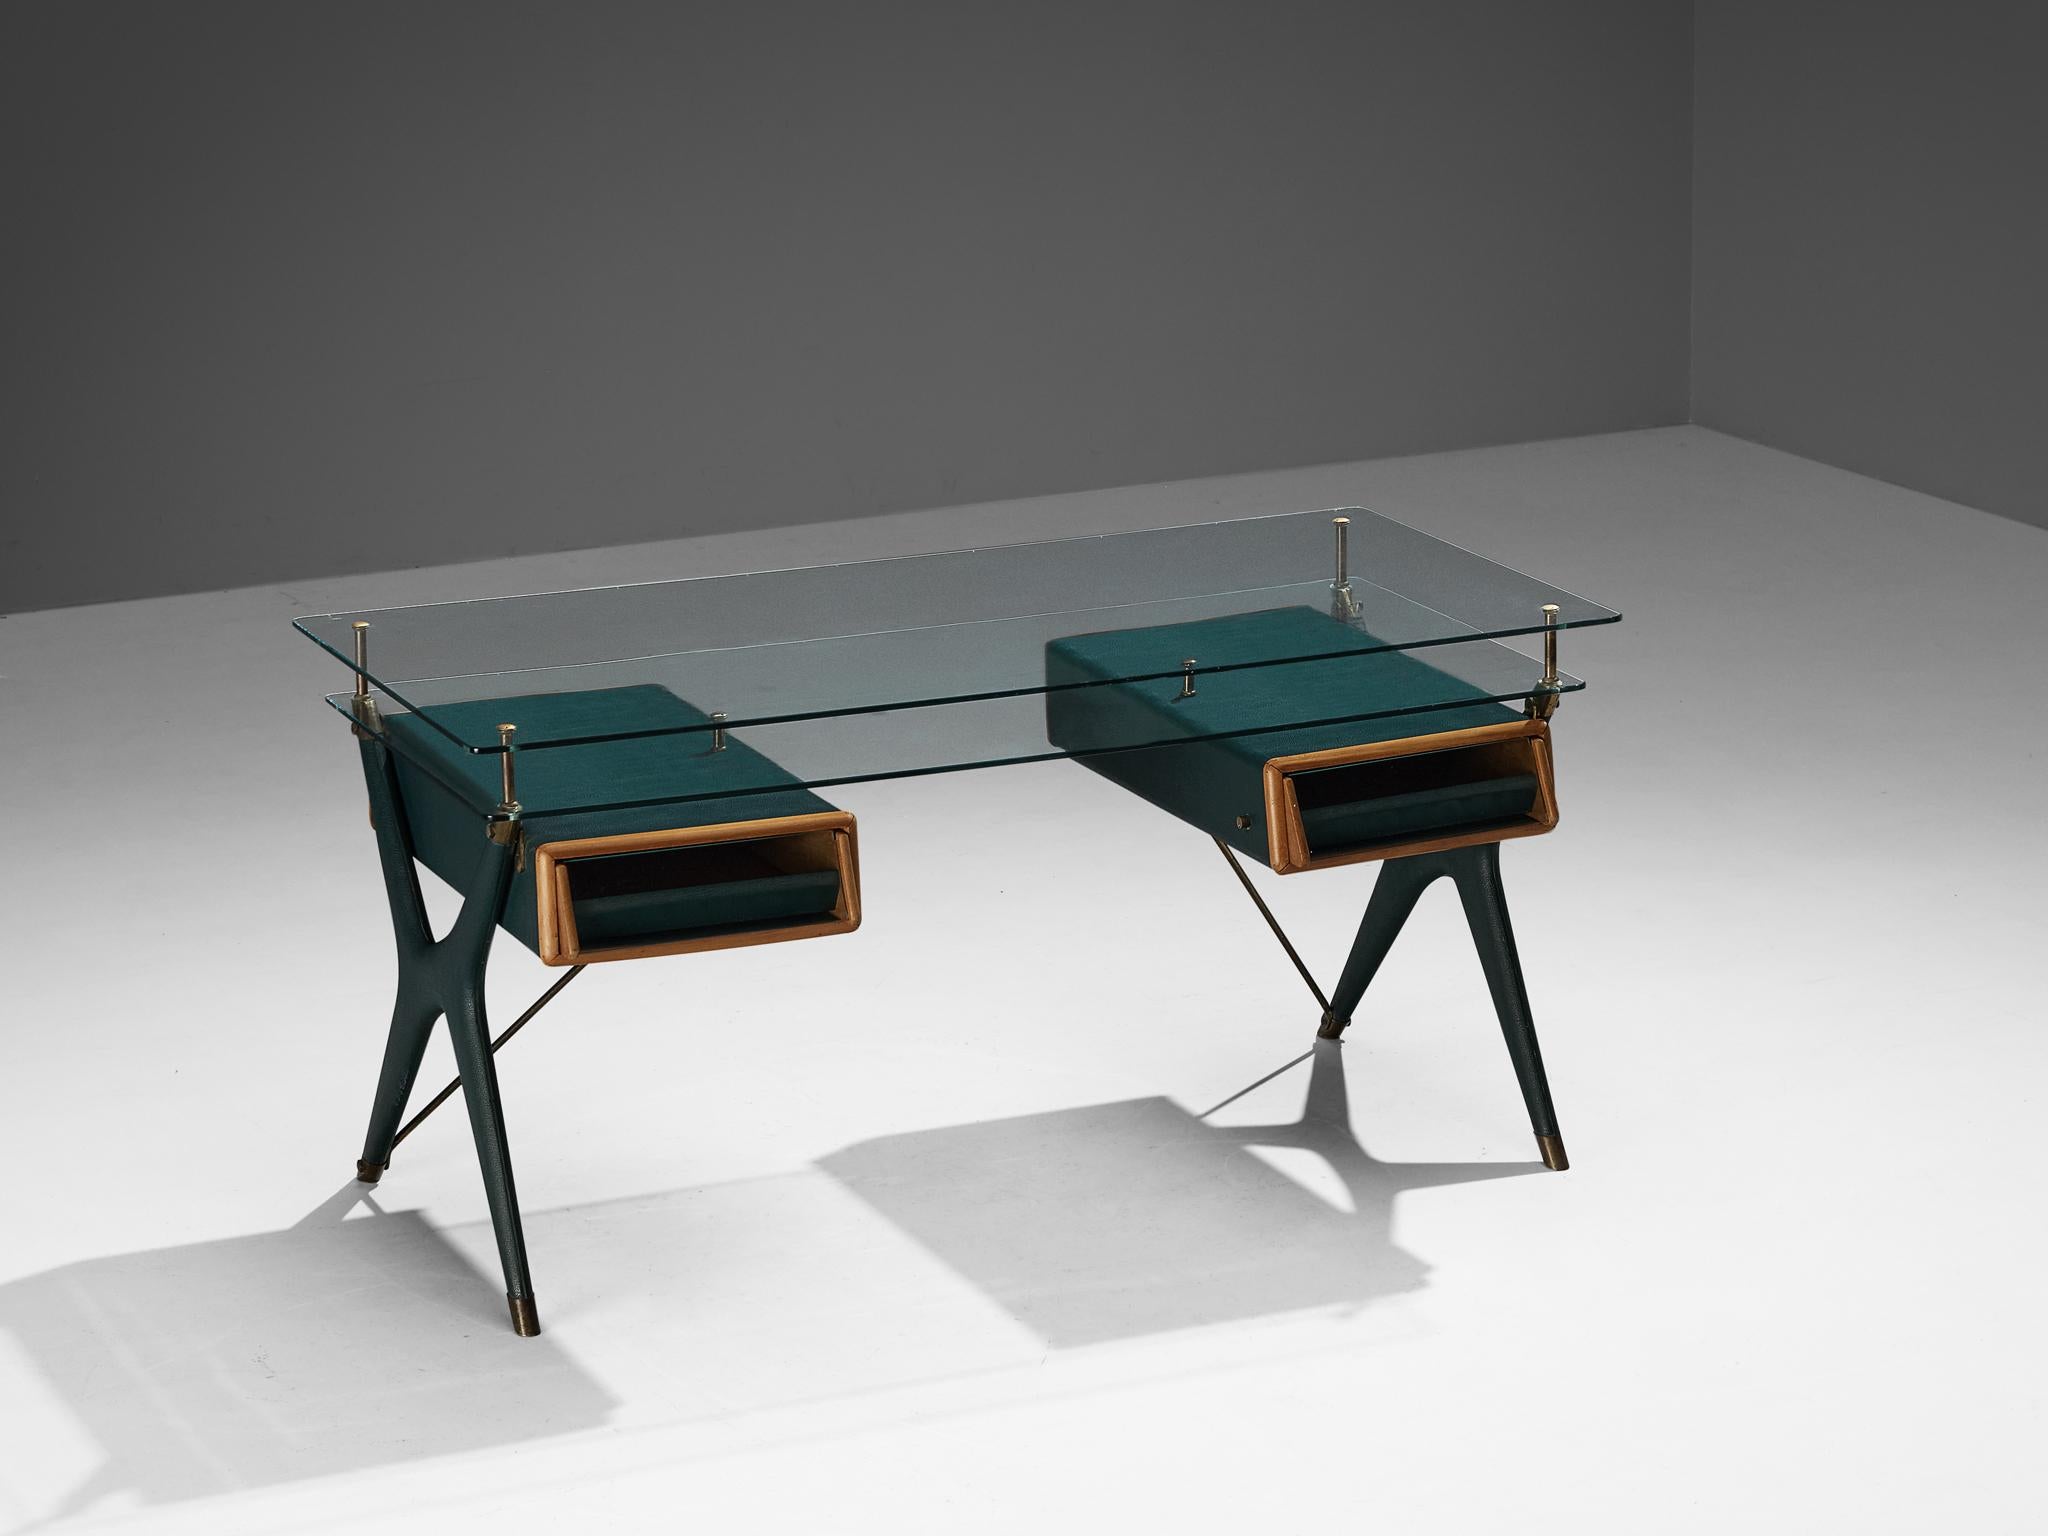 Silvio Berrone for Bialetti headquarters, writing desk, faux leather, brass, stained beech, Vitrex glass, Italy, 1955-56

This writing desk is designed by Silvio Berrone for the Bialetti headquarters in Omegna, the renowned producer of Italian